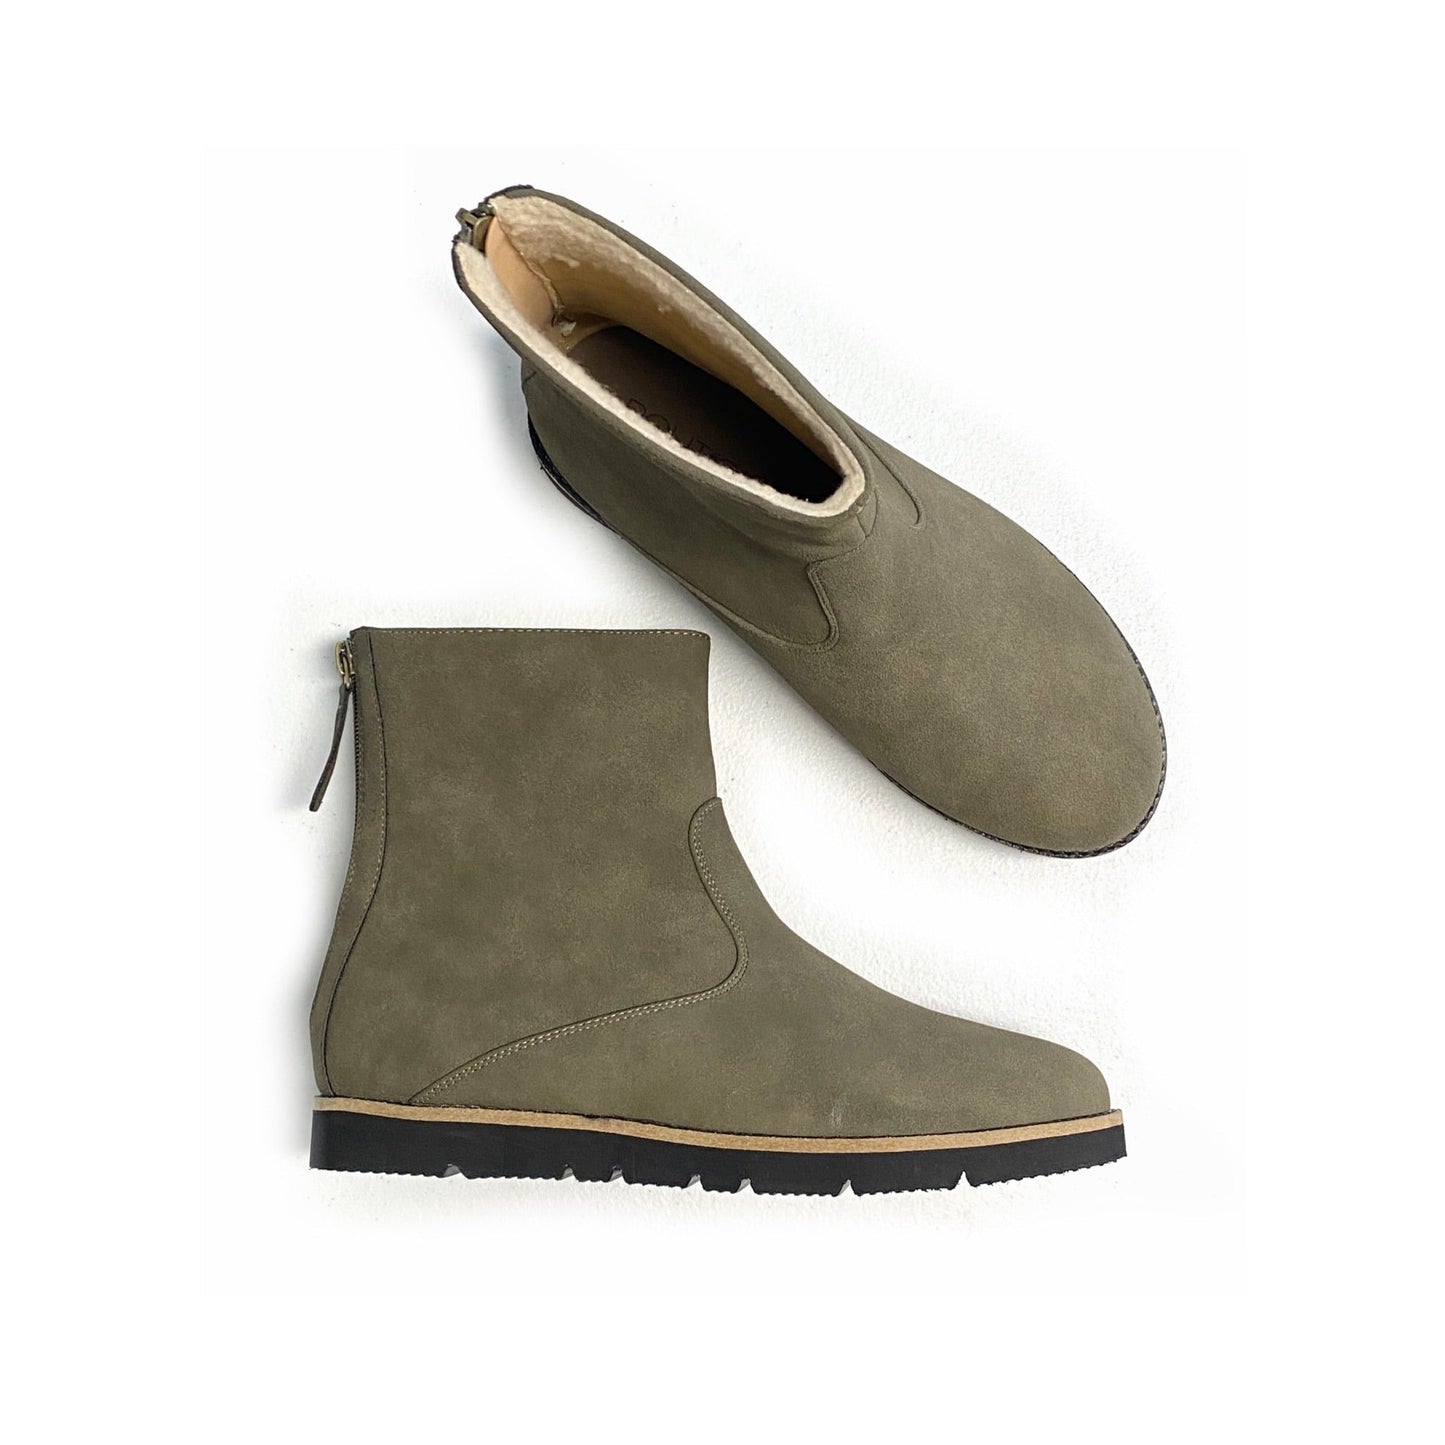 The Tobin Olive Booties